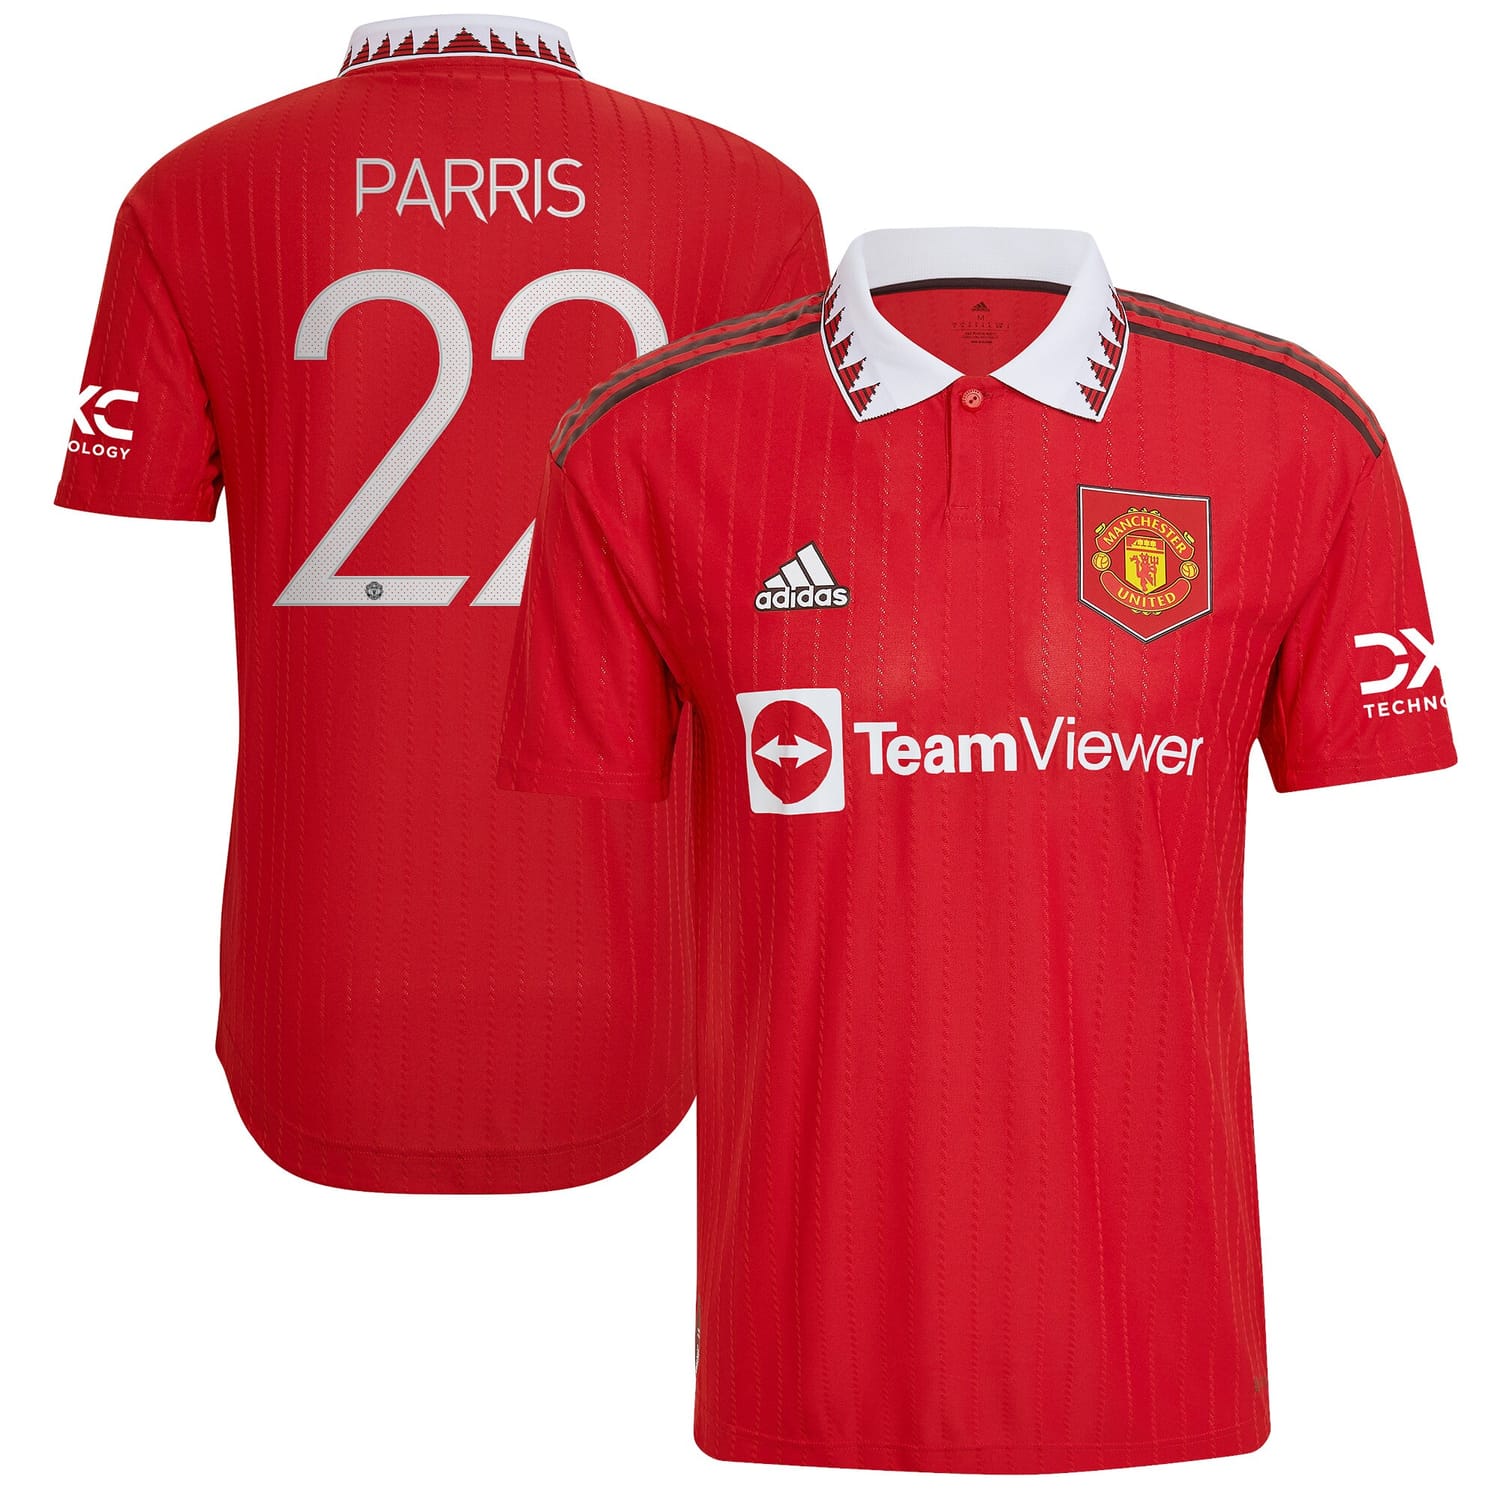 Premier League Manchester United Home Cup Authentic Jersey Shirt 2022-23 player Nikita Parris 22 printing for Men